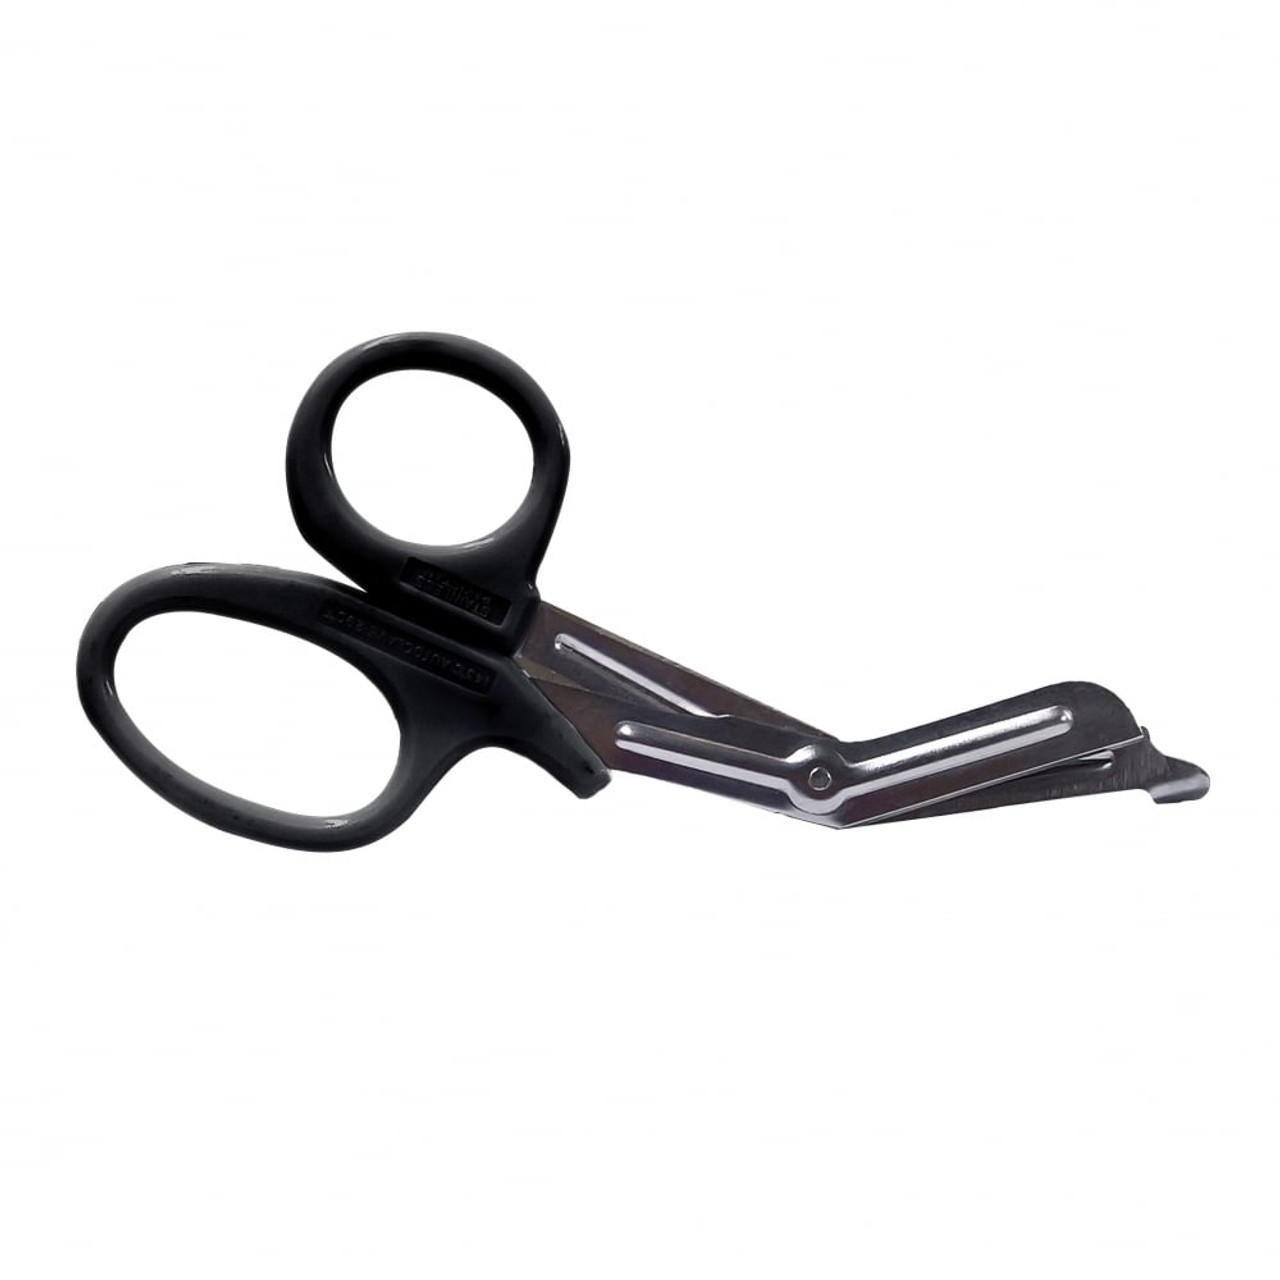 Stainless Steel Surgical Medical Sharp Scissors First Aid Medical